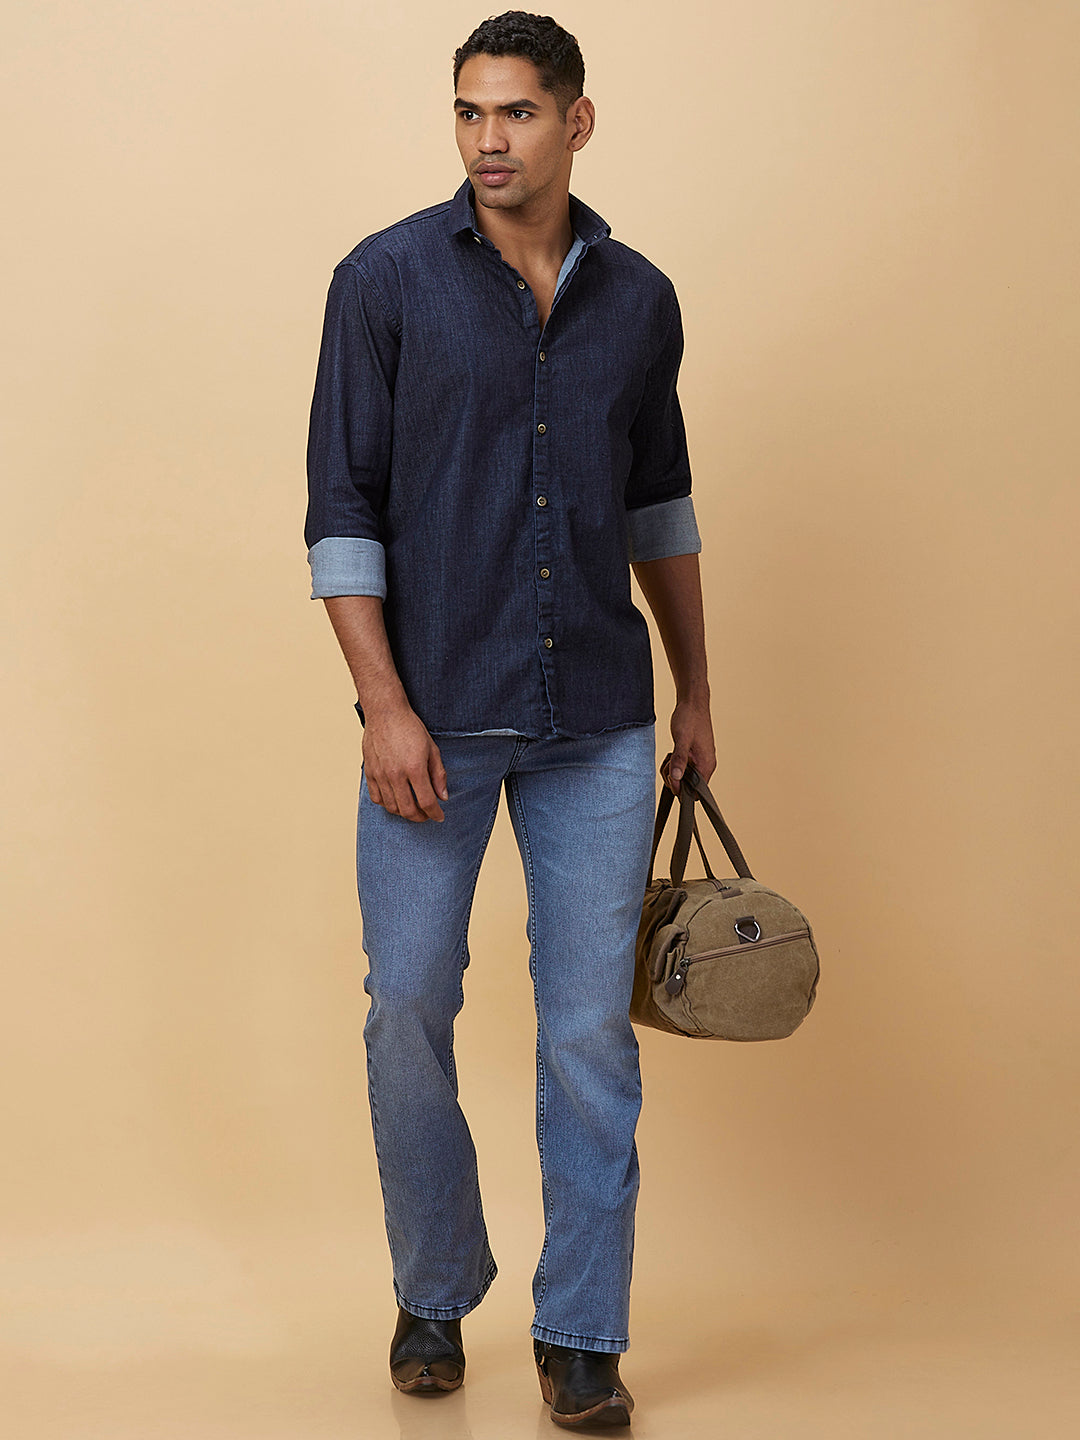 Stone Wash Blue Boot-cut Jeans with Fade